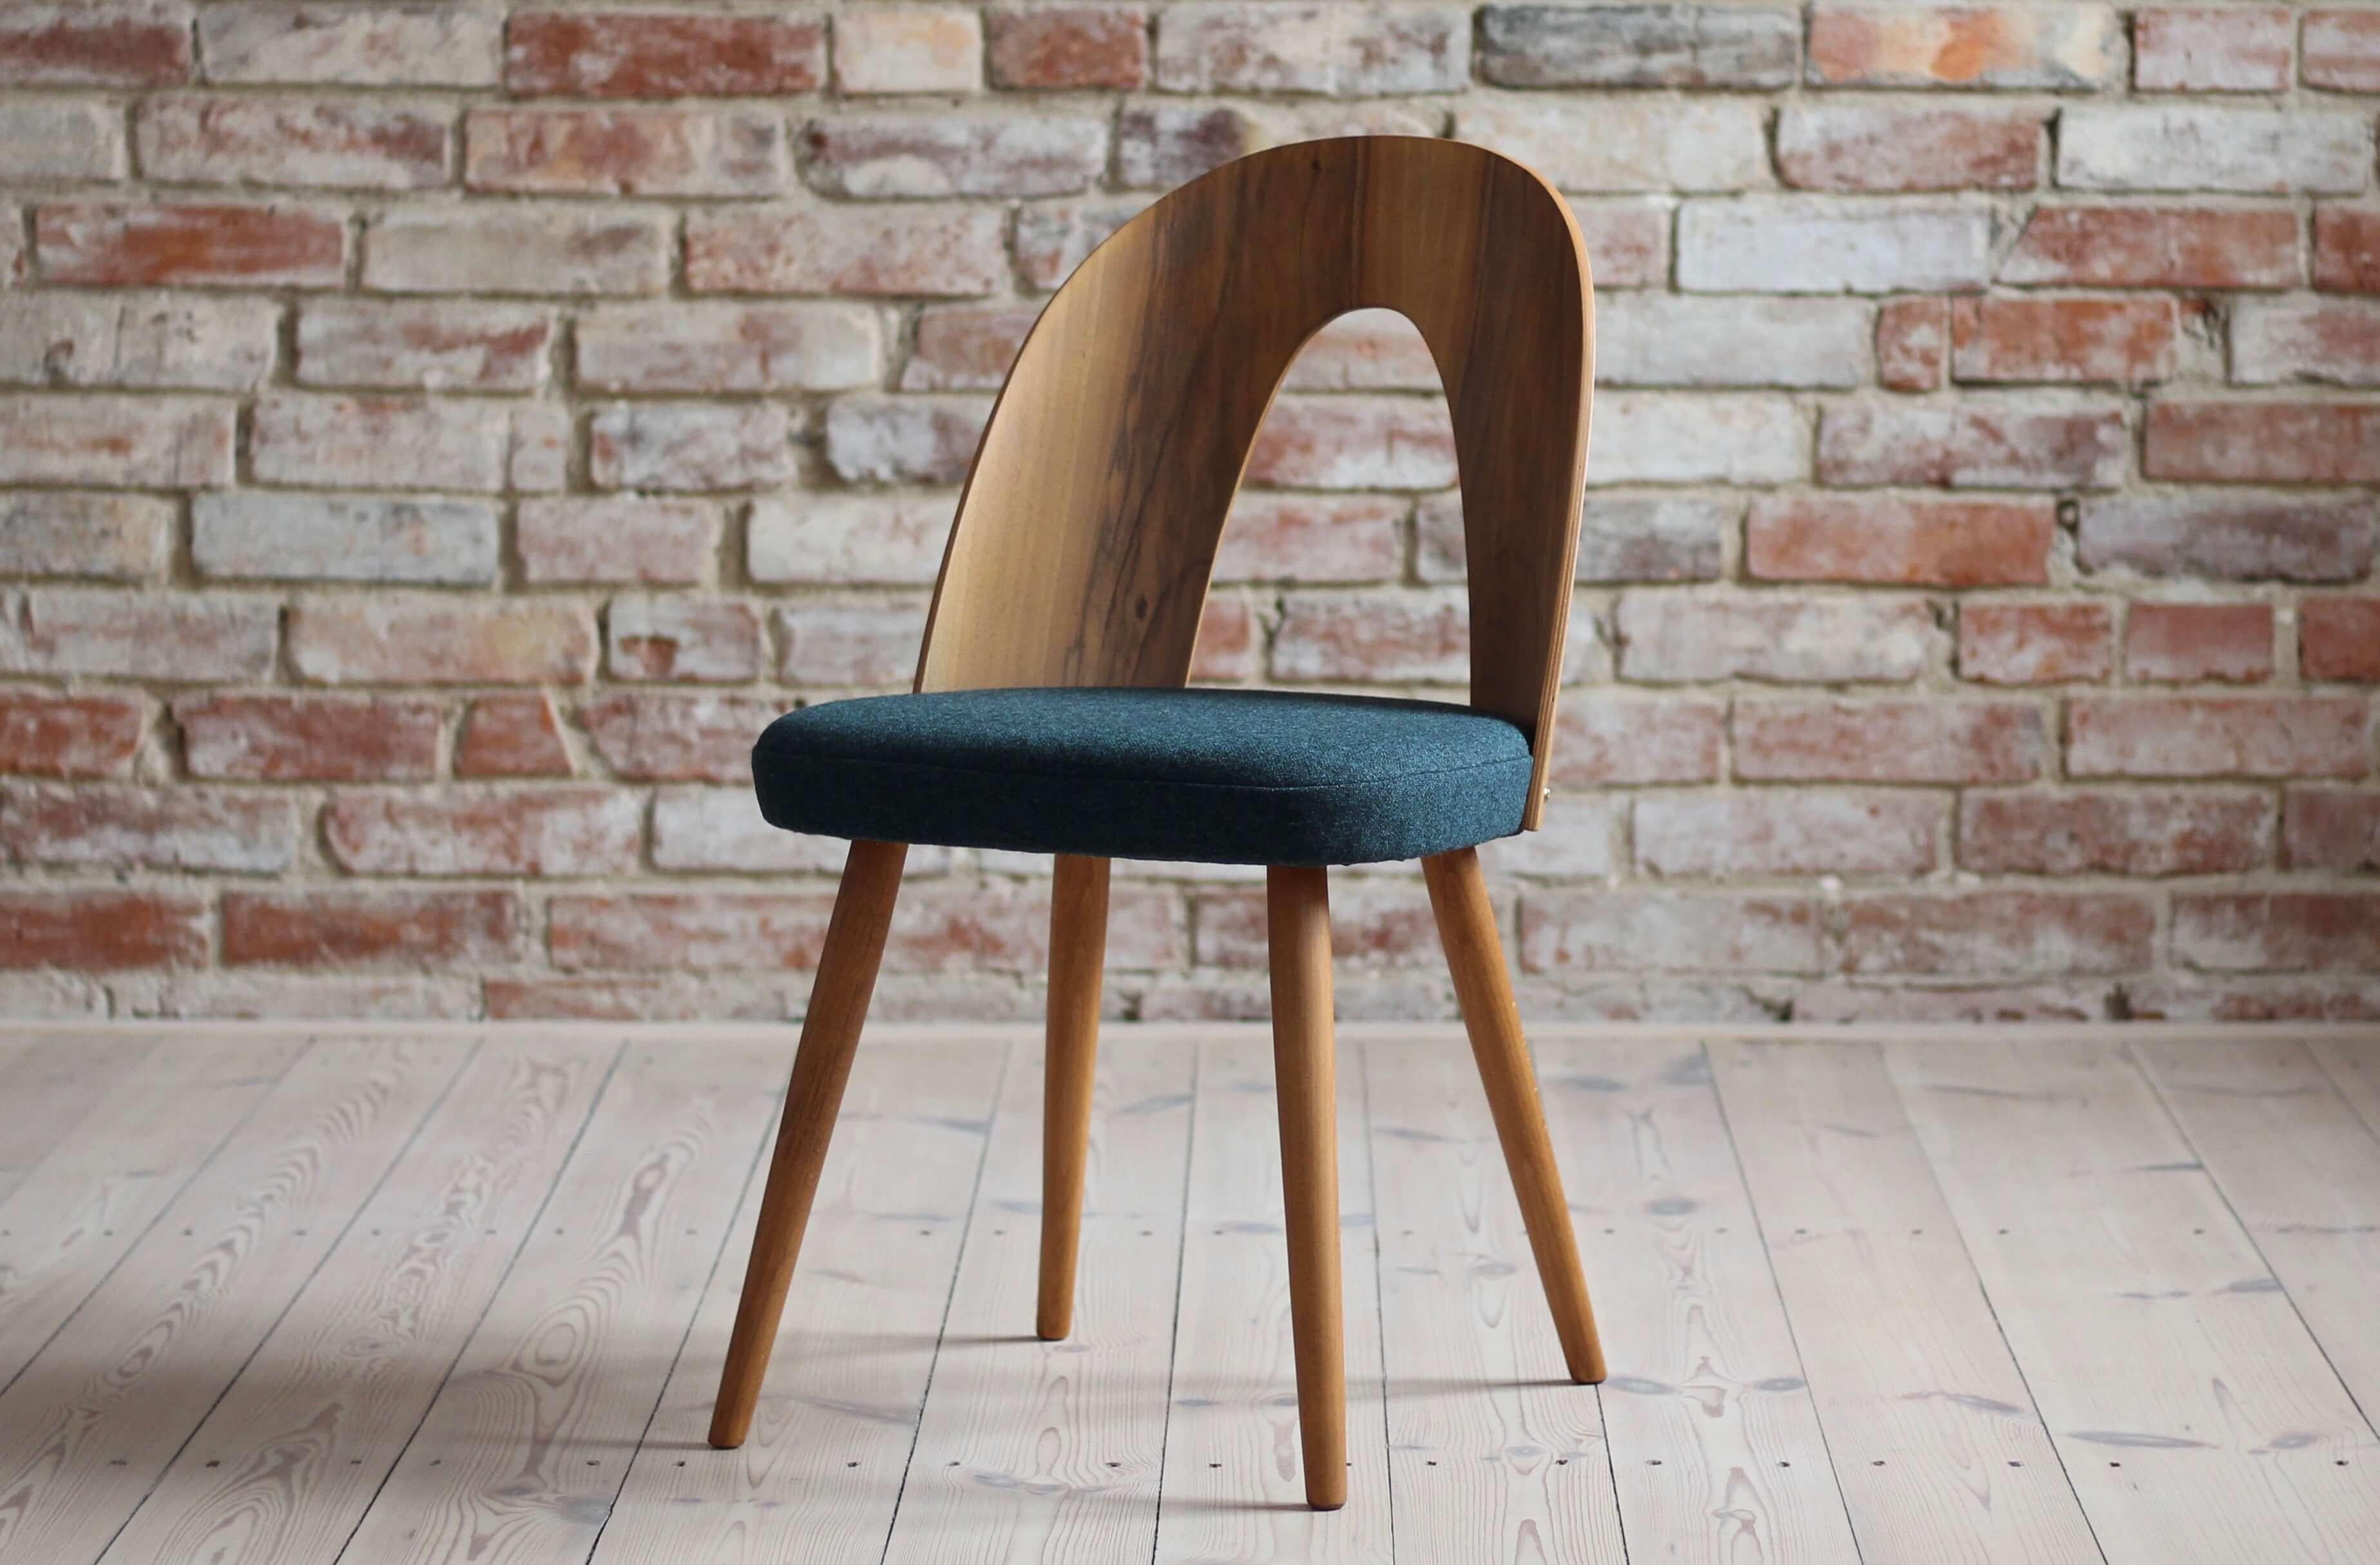 Set of 4 Midcentury Dining Chairs by A. Šuman, Reupholstered in Kvadrat Fabric 6